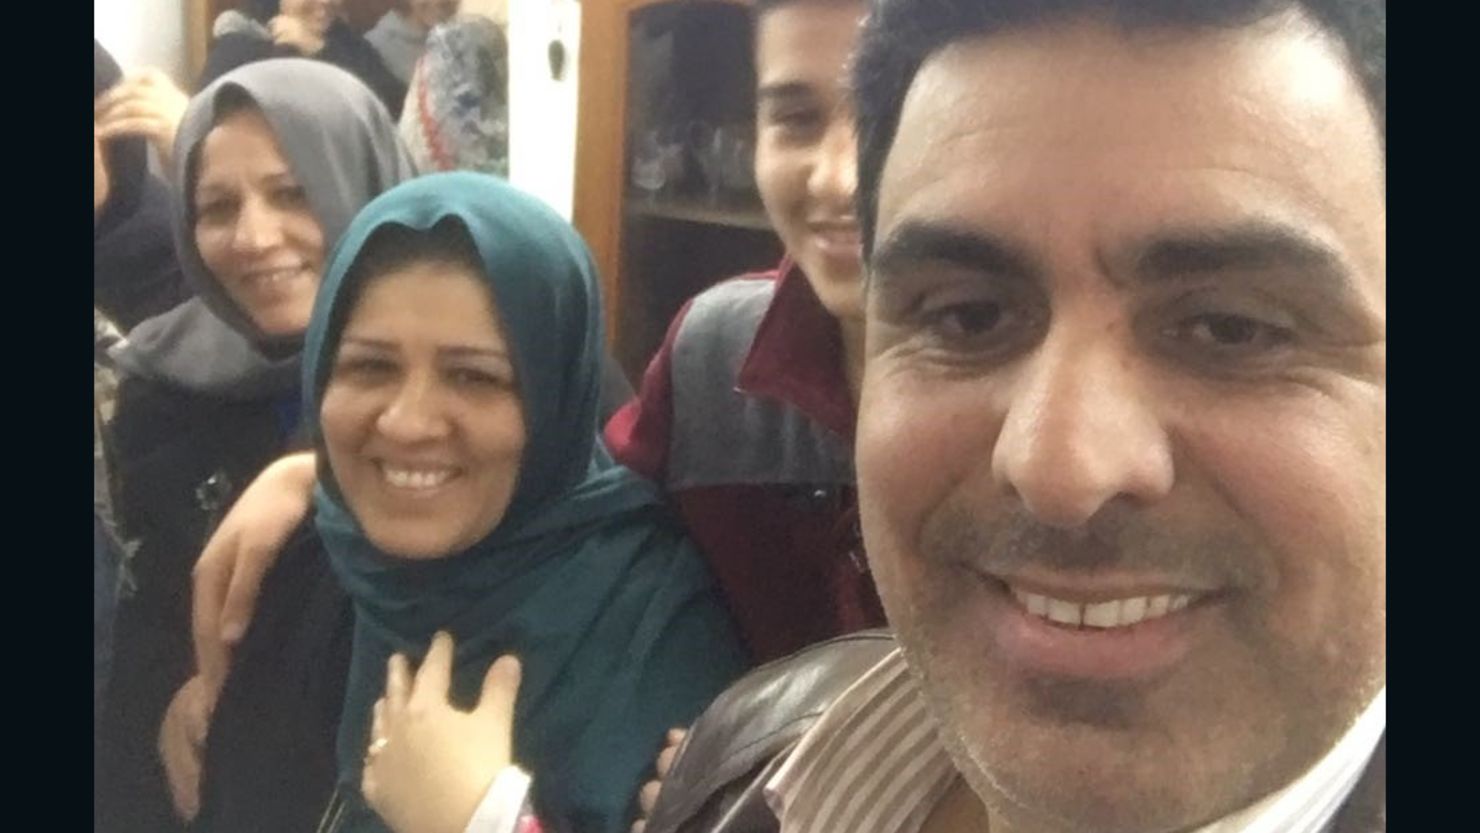 Afrah Shawqi al-Qaisi, wearing a blue scarf, is back home with her family, her sister says